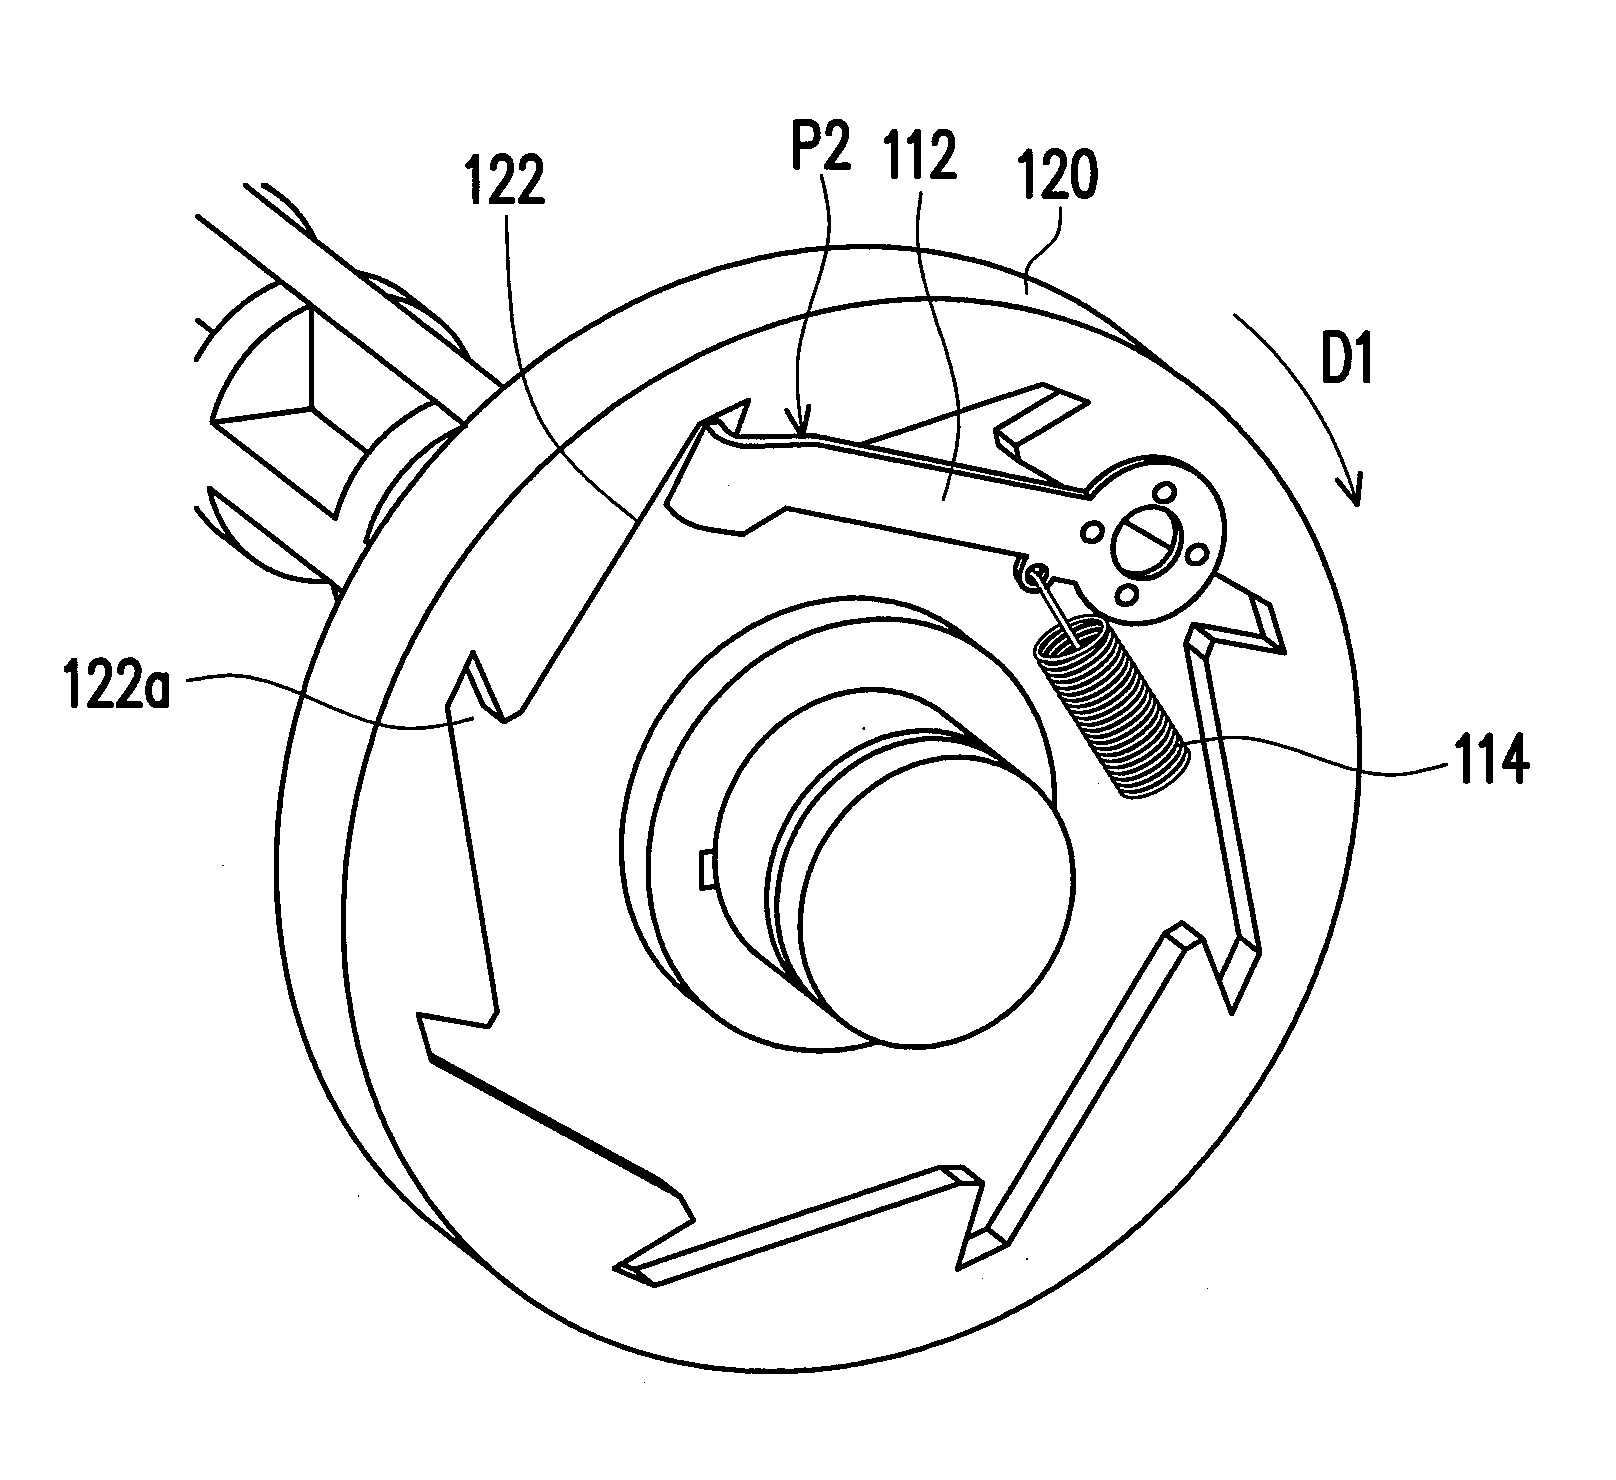 Gear assembly and electronic device using the same